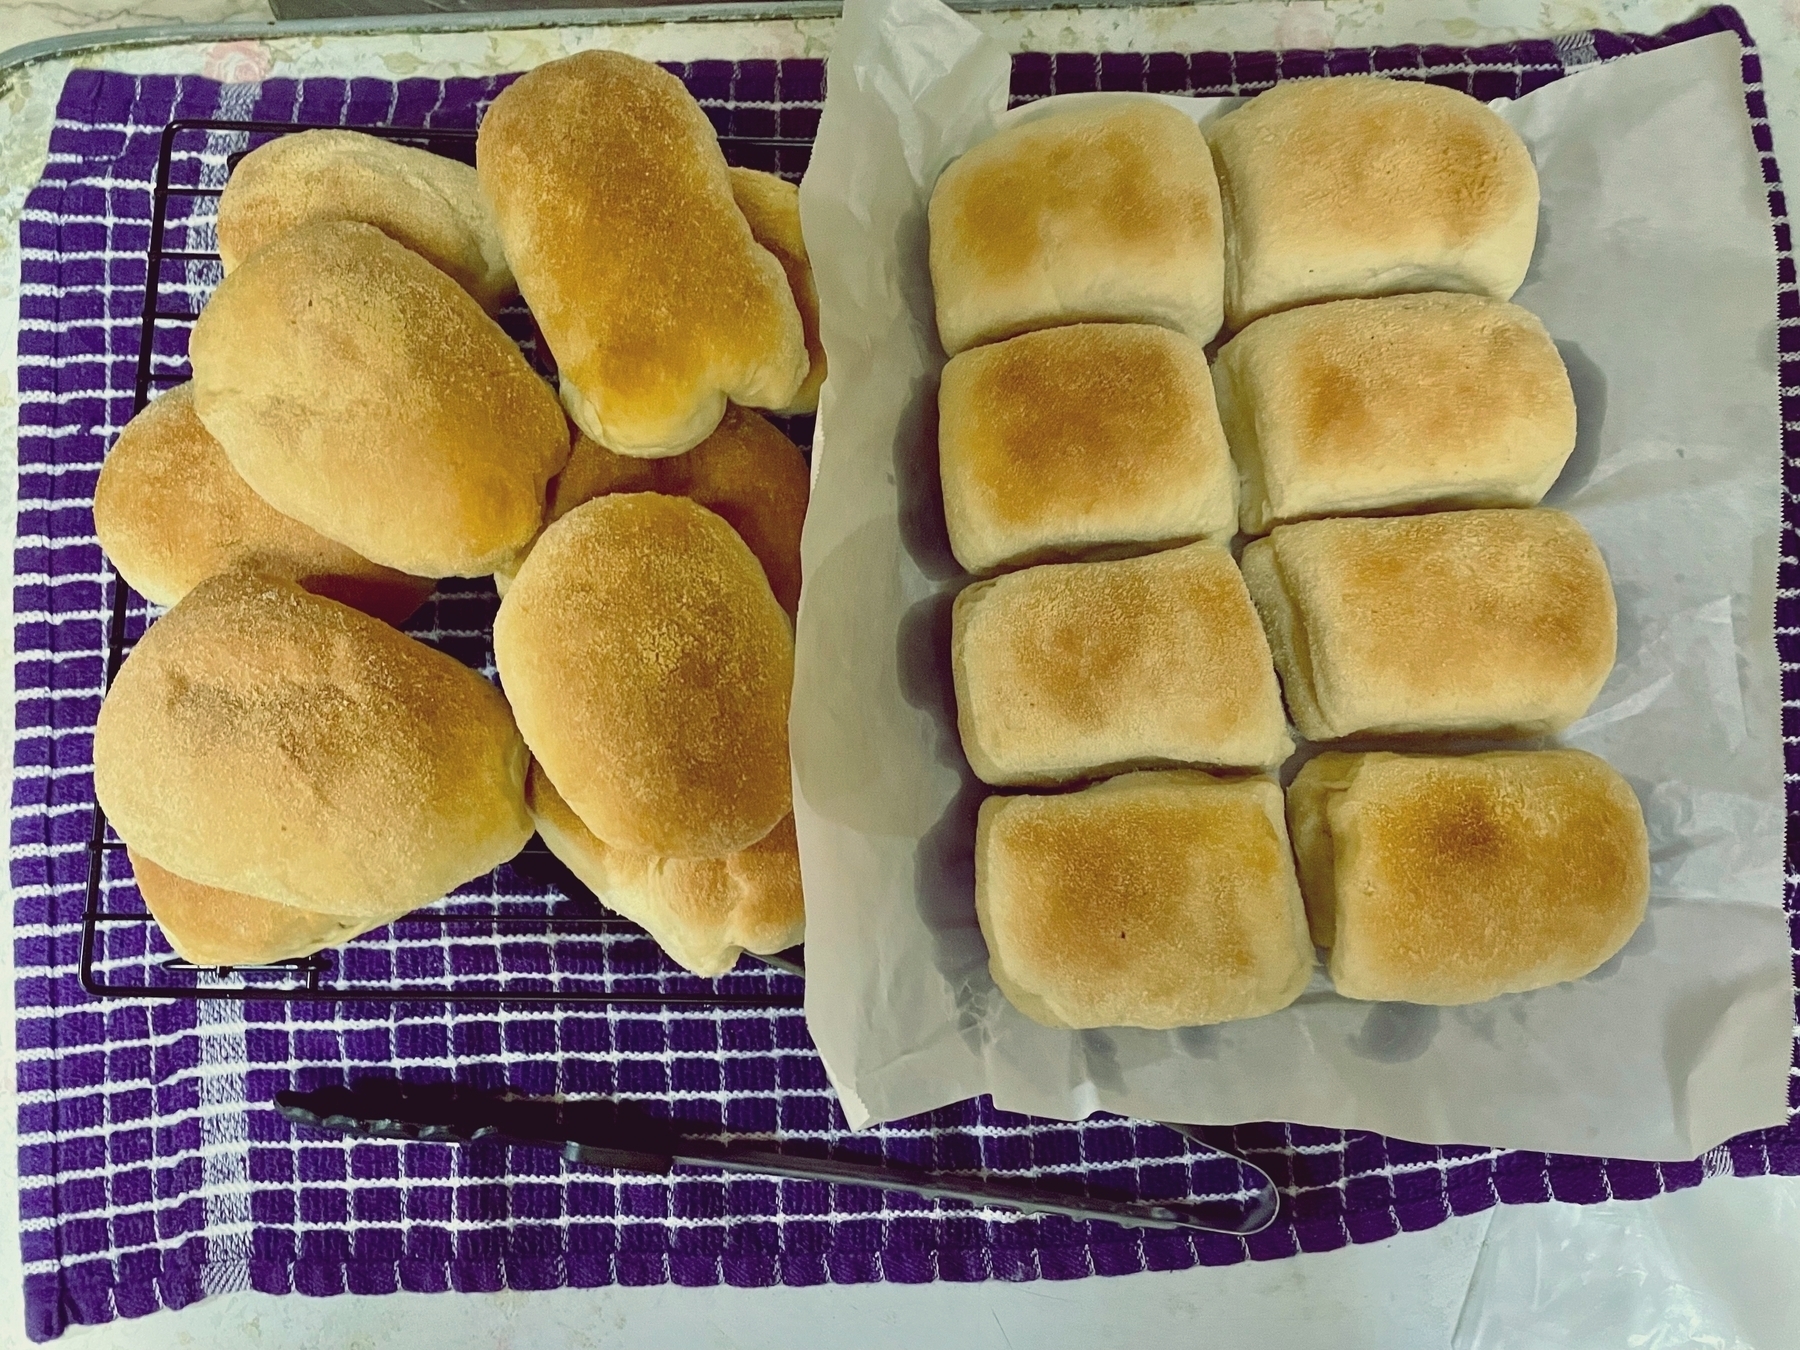 baked plain pandesal on the left, filled with corned beef are on the right